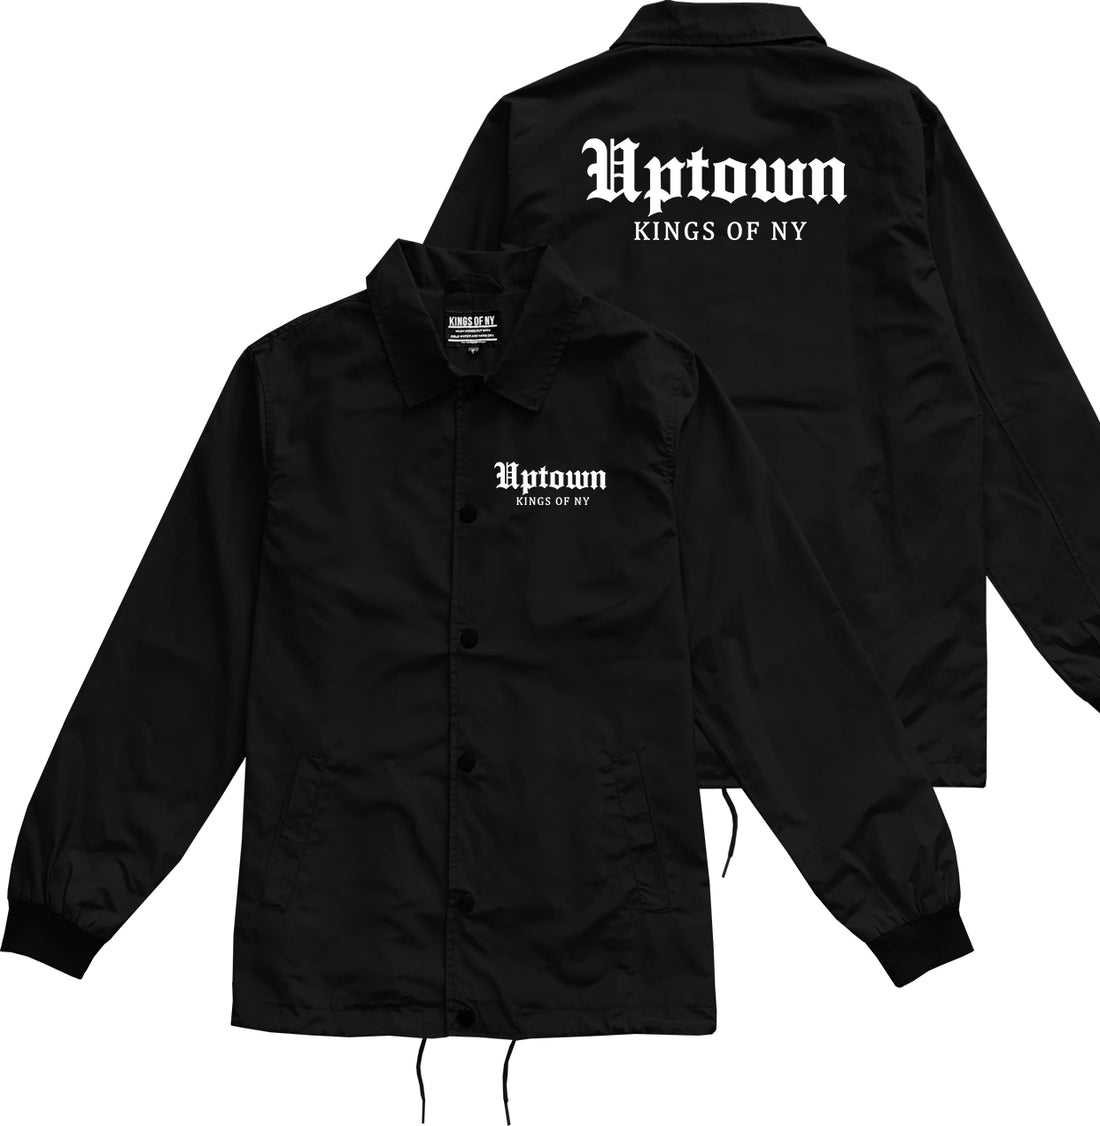 Uptown Old English Mens Coaches Jacket Black by Kings Of NY